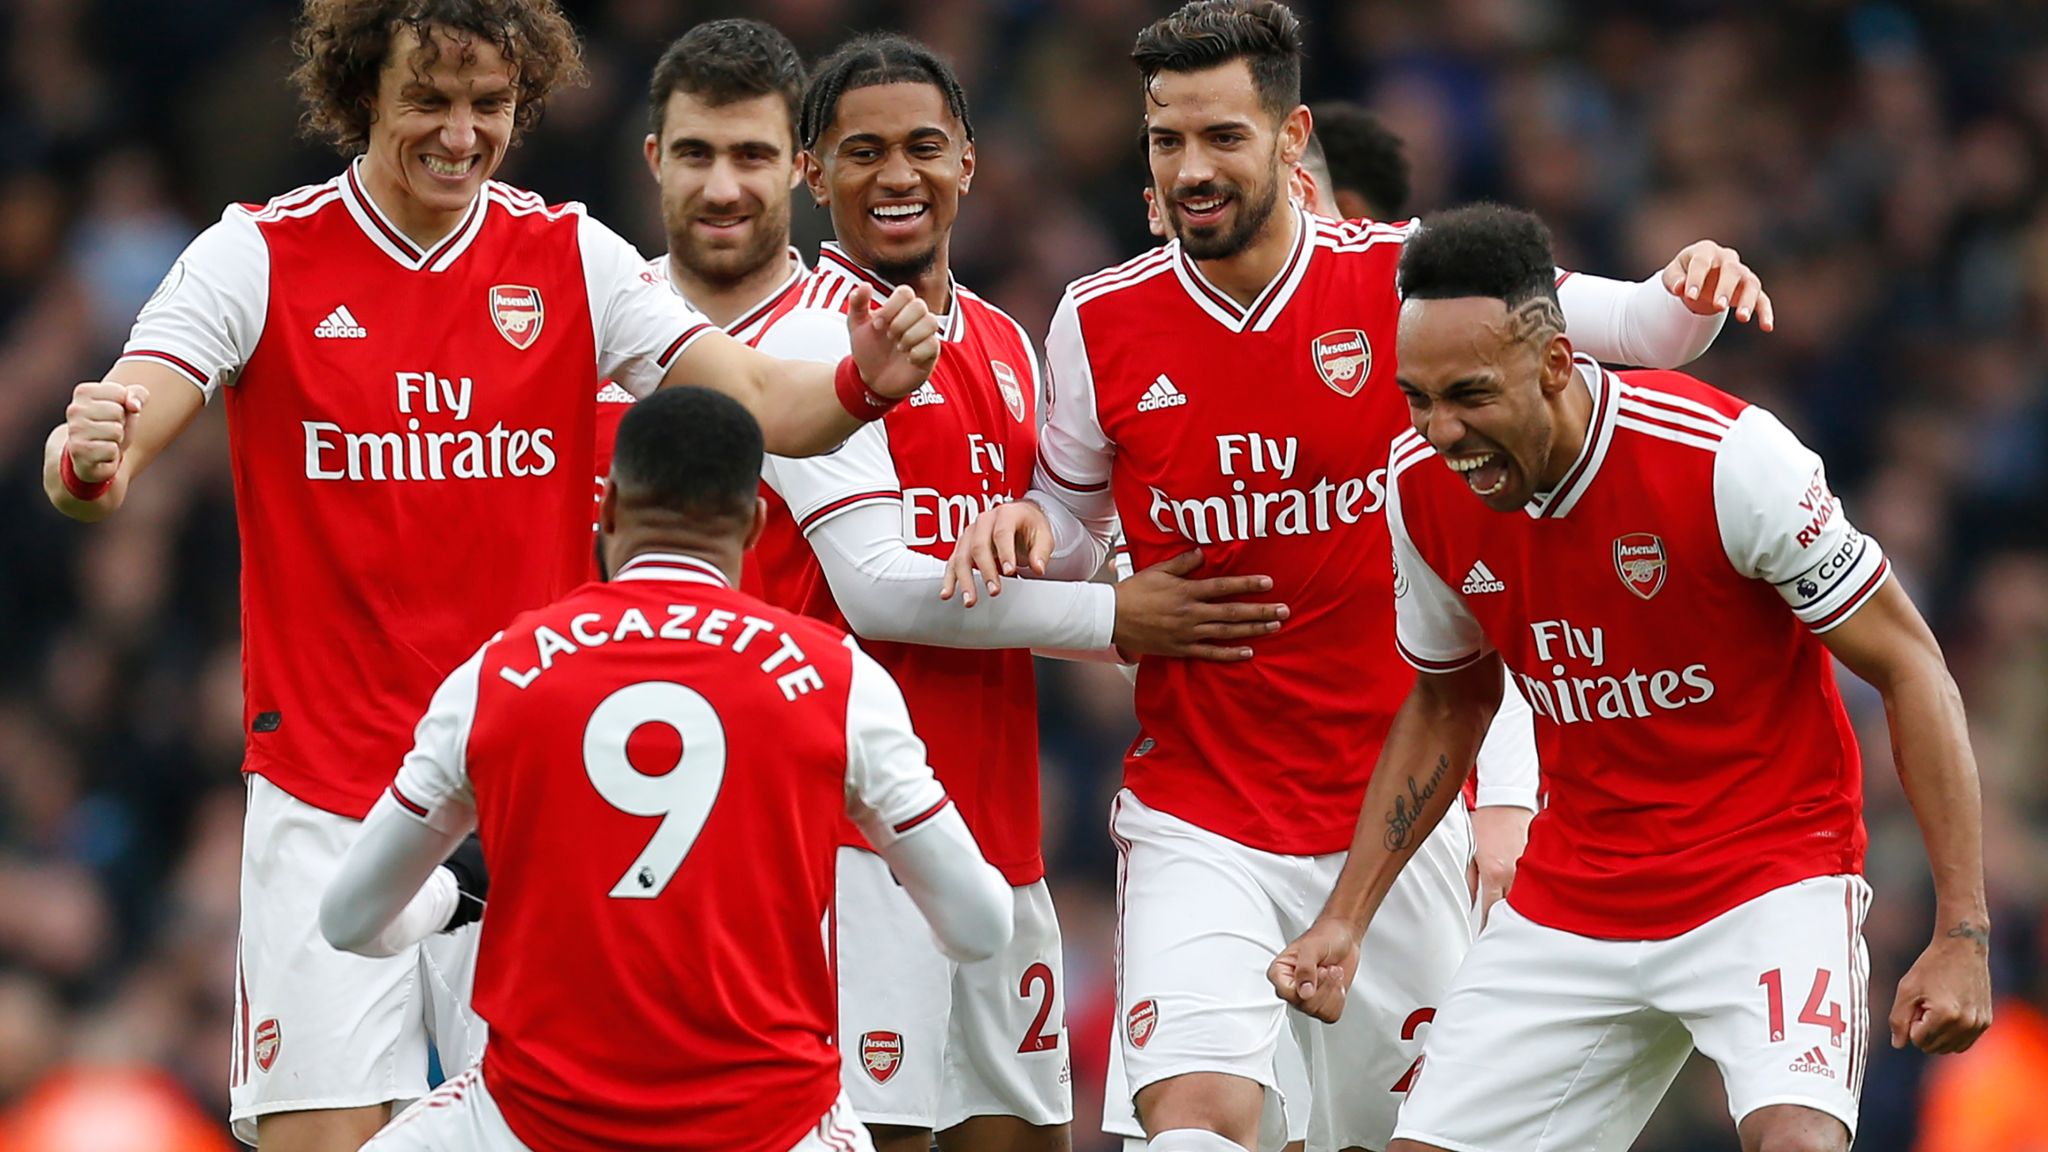 Arsenal 2019/20: Five stats you didn't know | Football News | Sky Sports